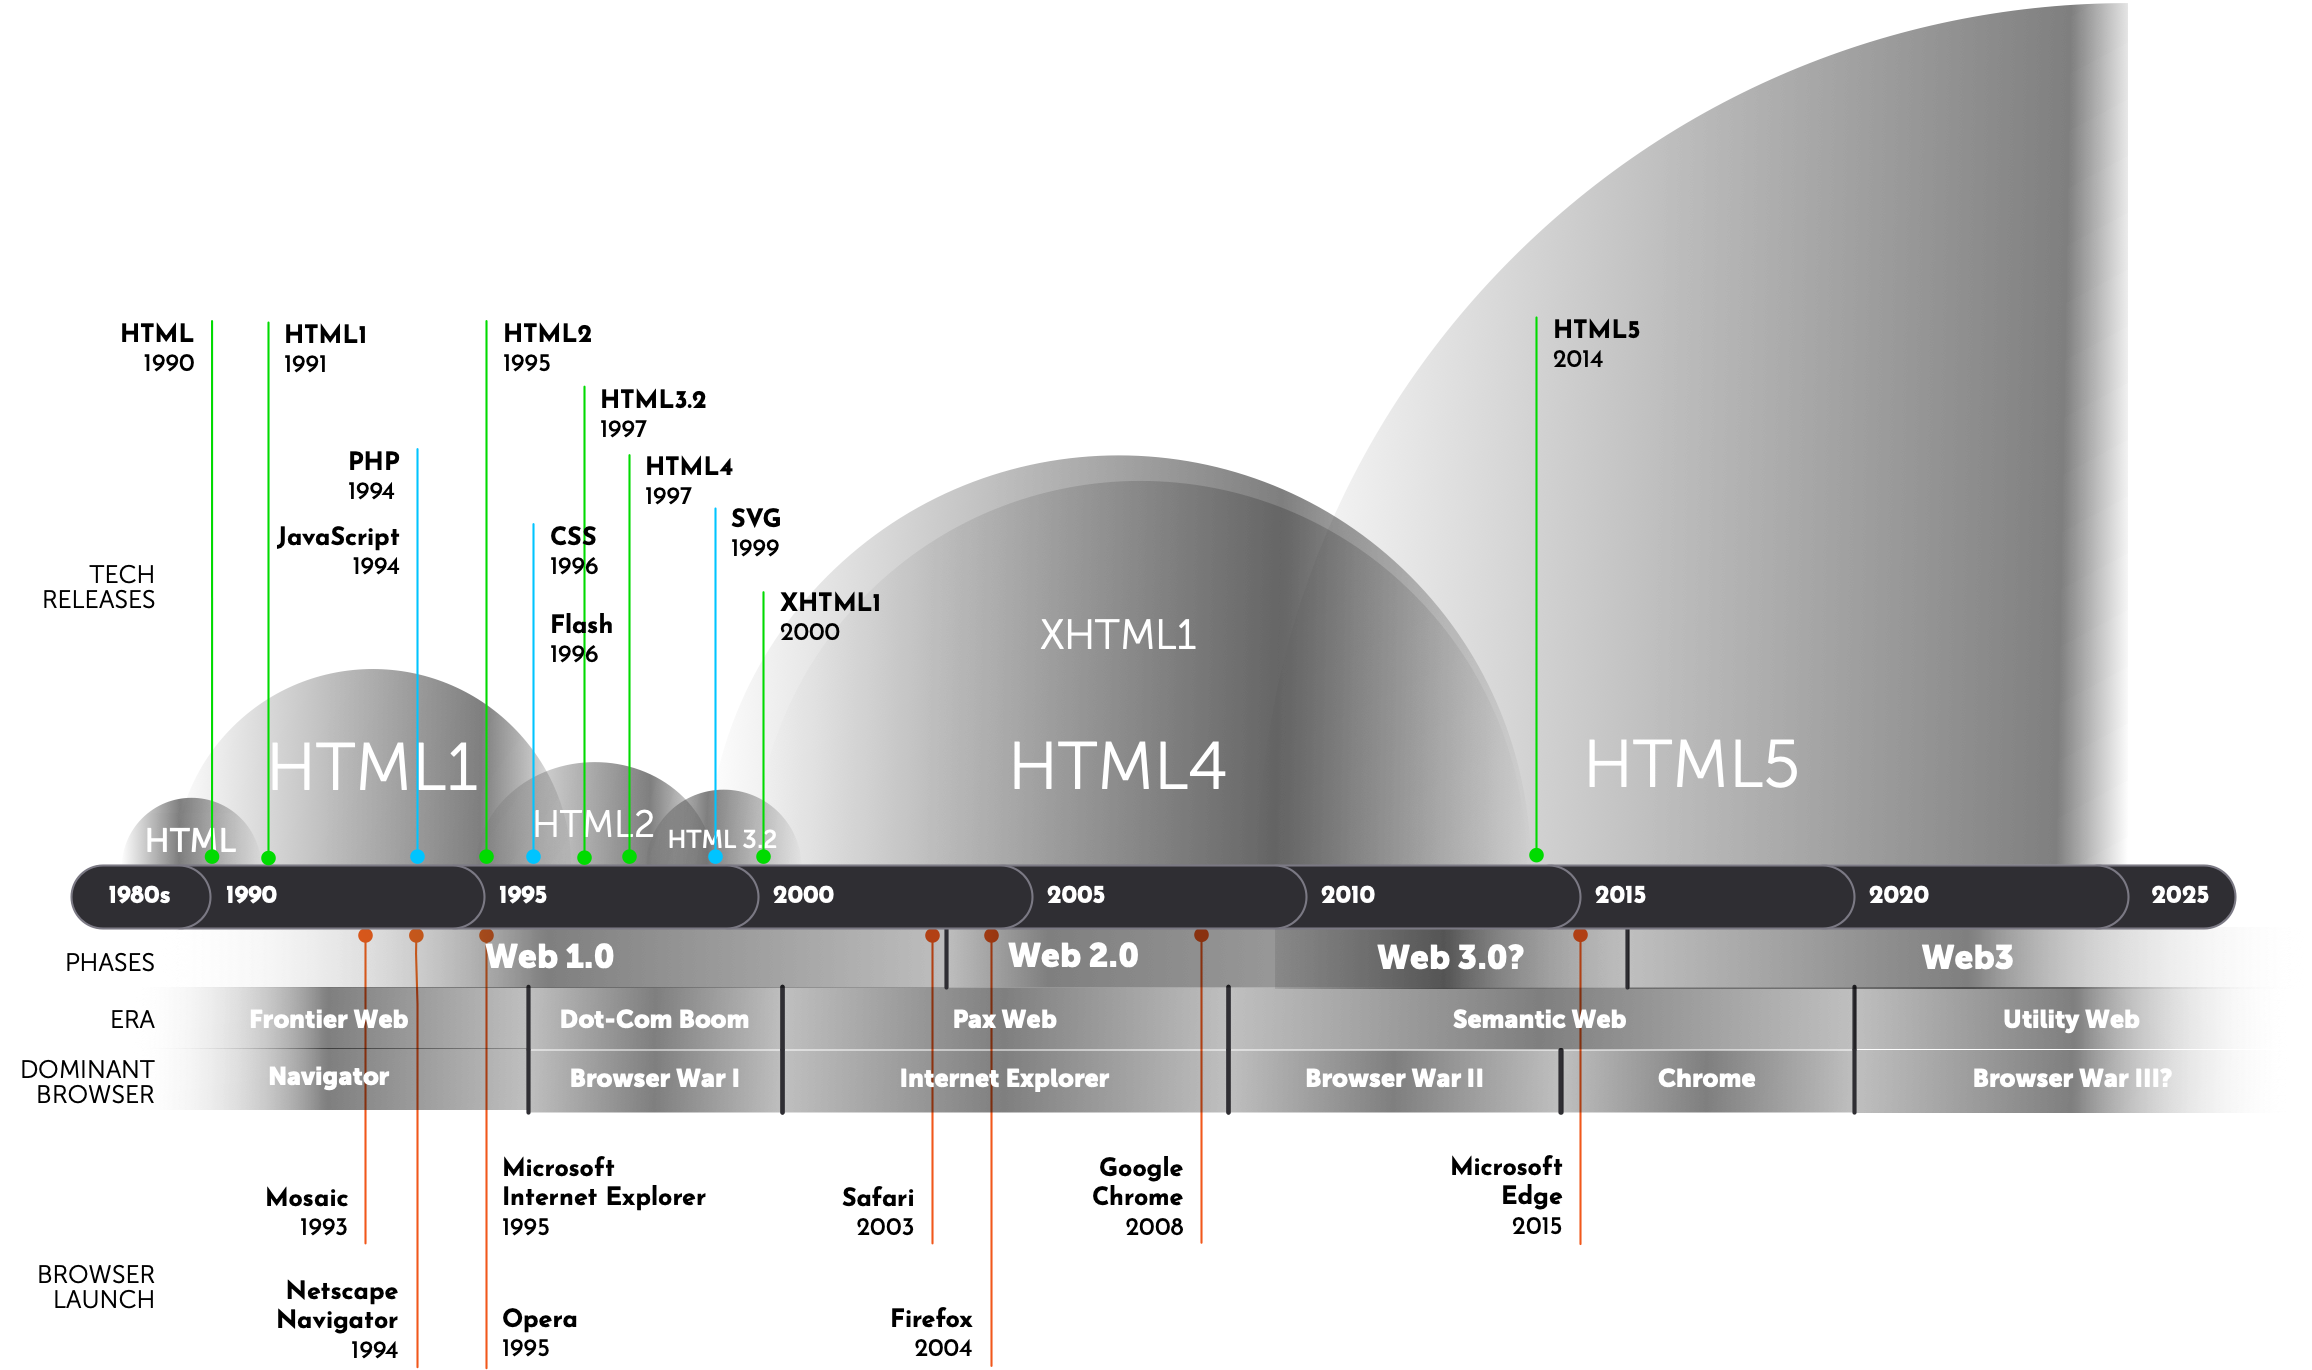 This timeline shows the adaptation of each version of HTML, along with other key technology releases, phases in the Web design & development, Web eras, and the dominant browser at the time.